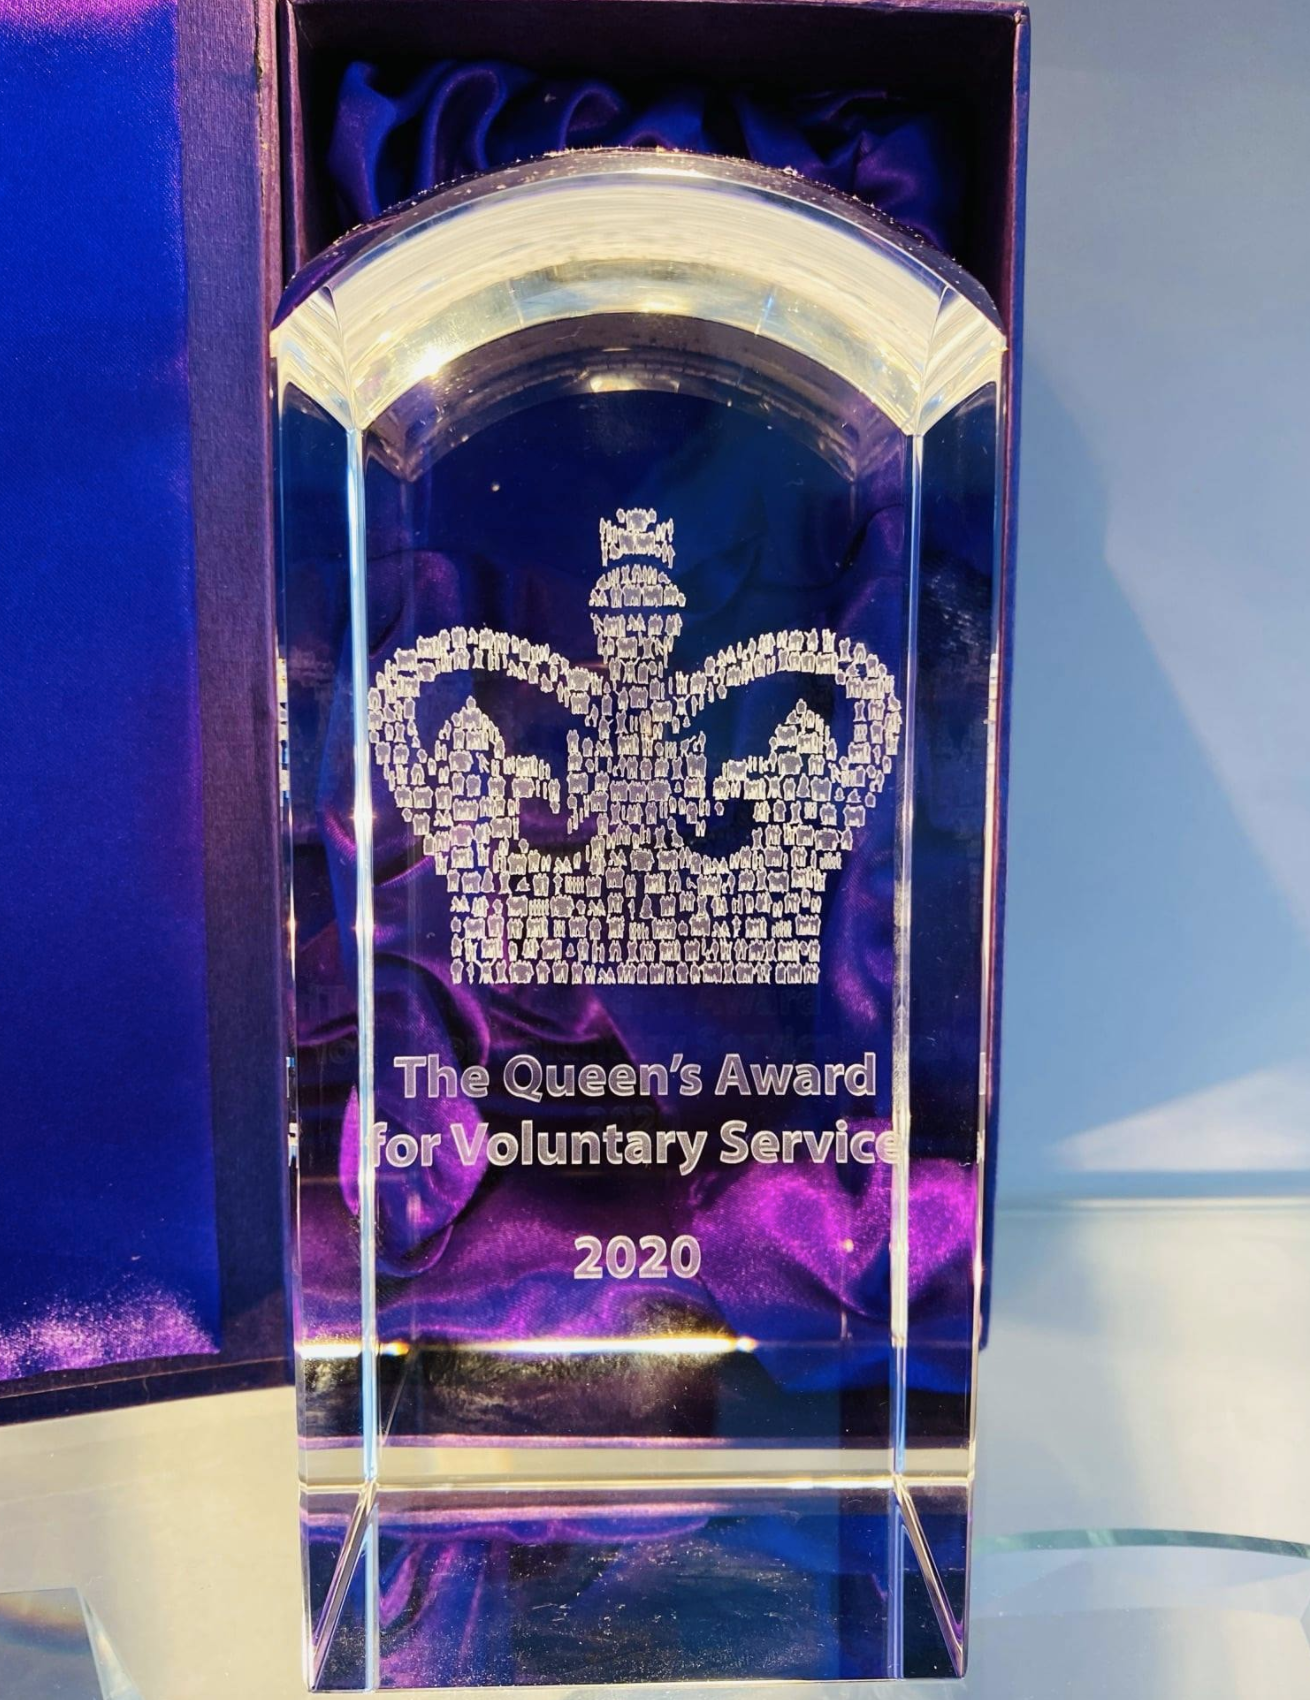 Sikh Community Centre & Youth Club presented with the Queens Award for Voluntary Service 